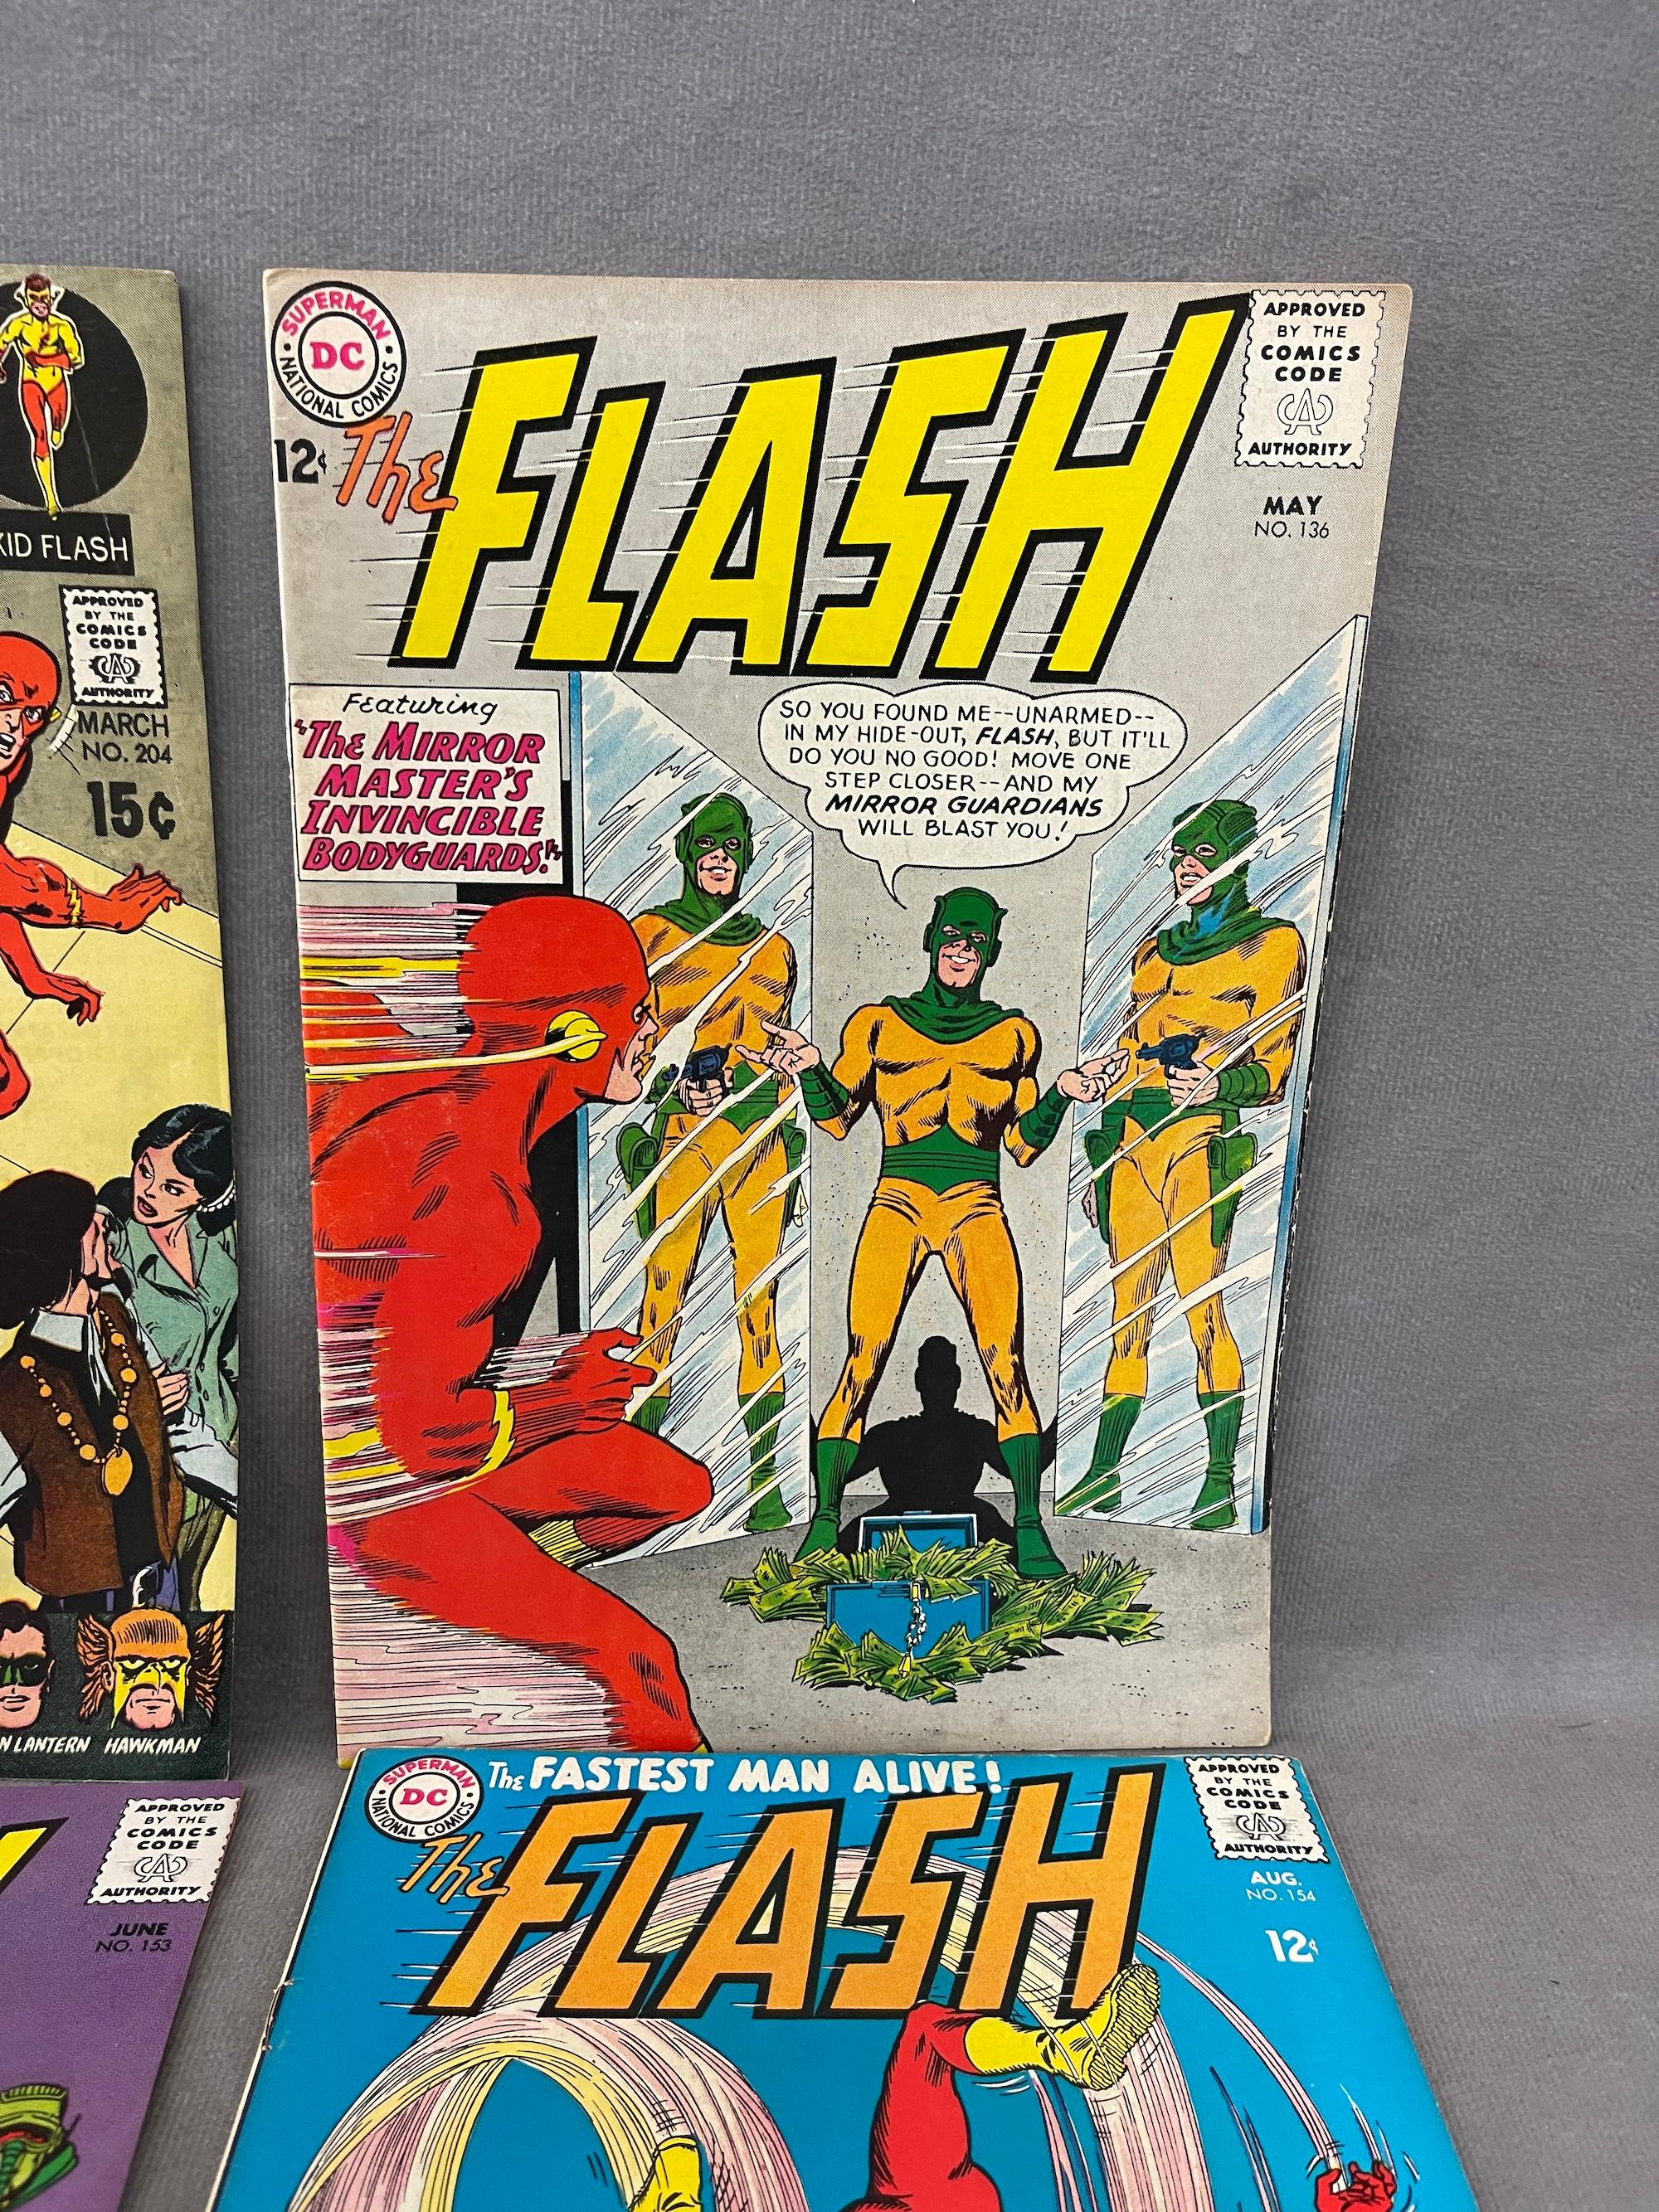 VINTAGE COMIC BOOK COLLECTION JUSTICE FLASH 136, 197, 153, 213, 204,154 LOT 6